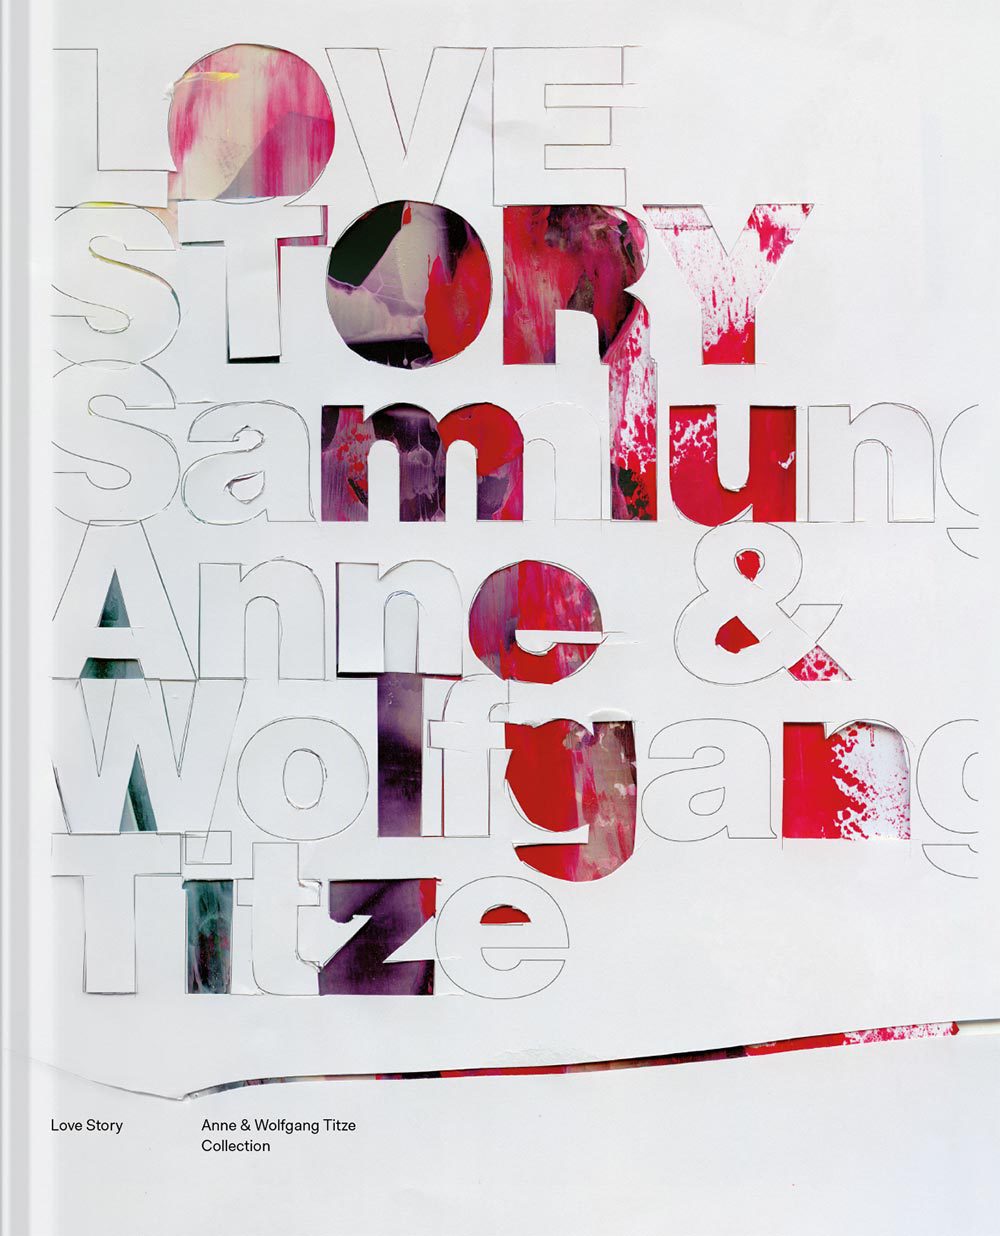 LOVE STORY: Sammlung Anne and Wolfgang Titze